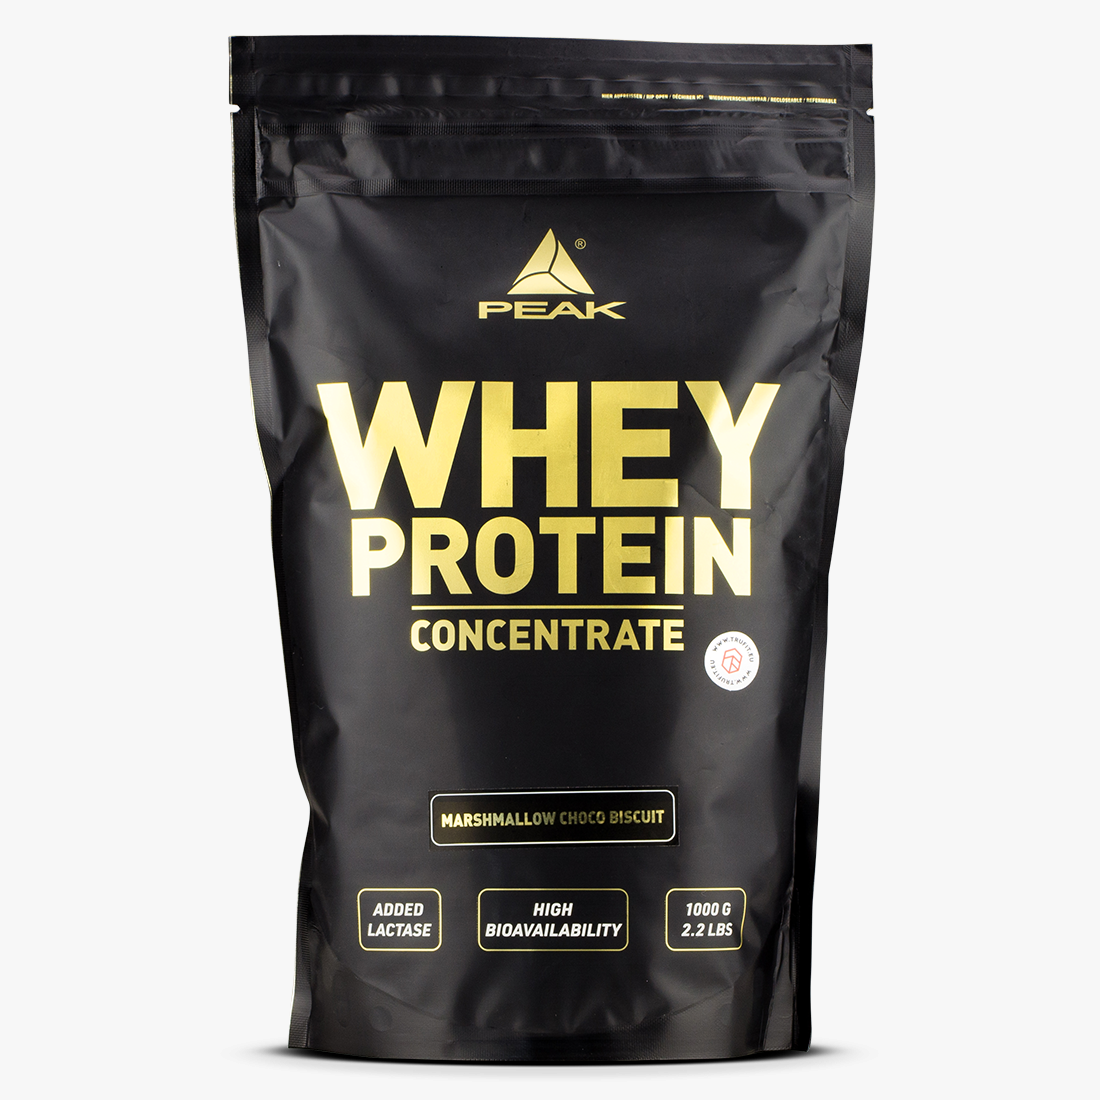 Peak - Whey Protein Concentrate - High protein content - TRU·FIT